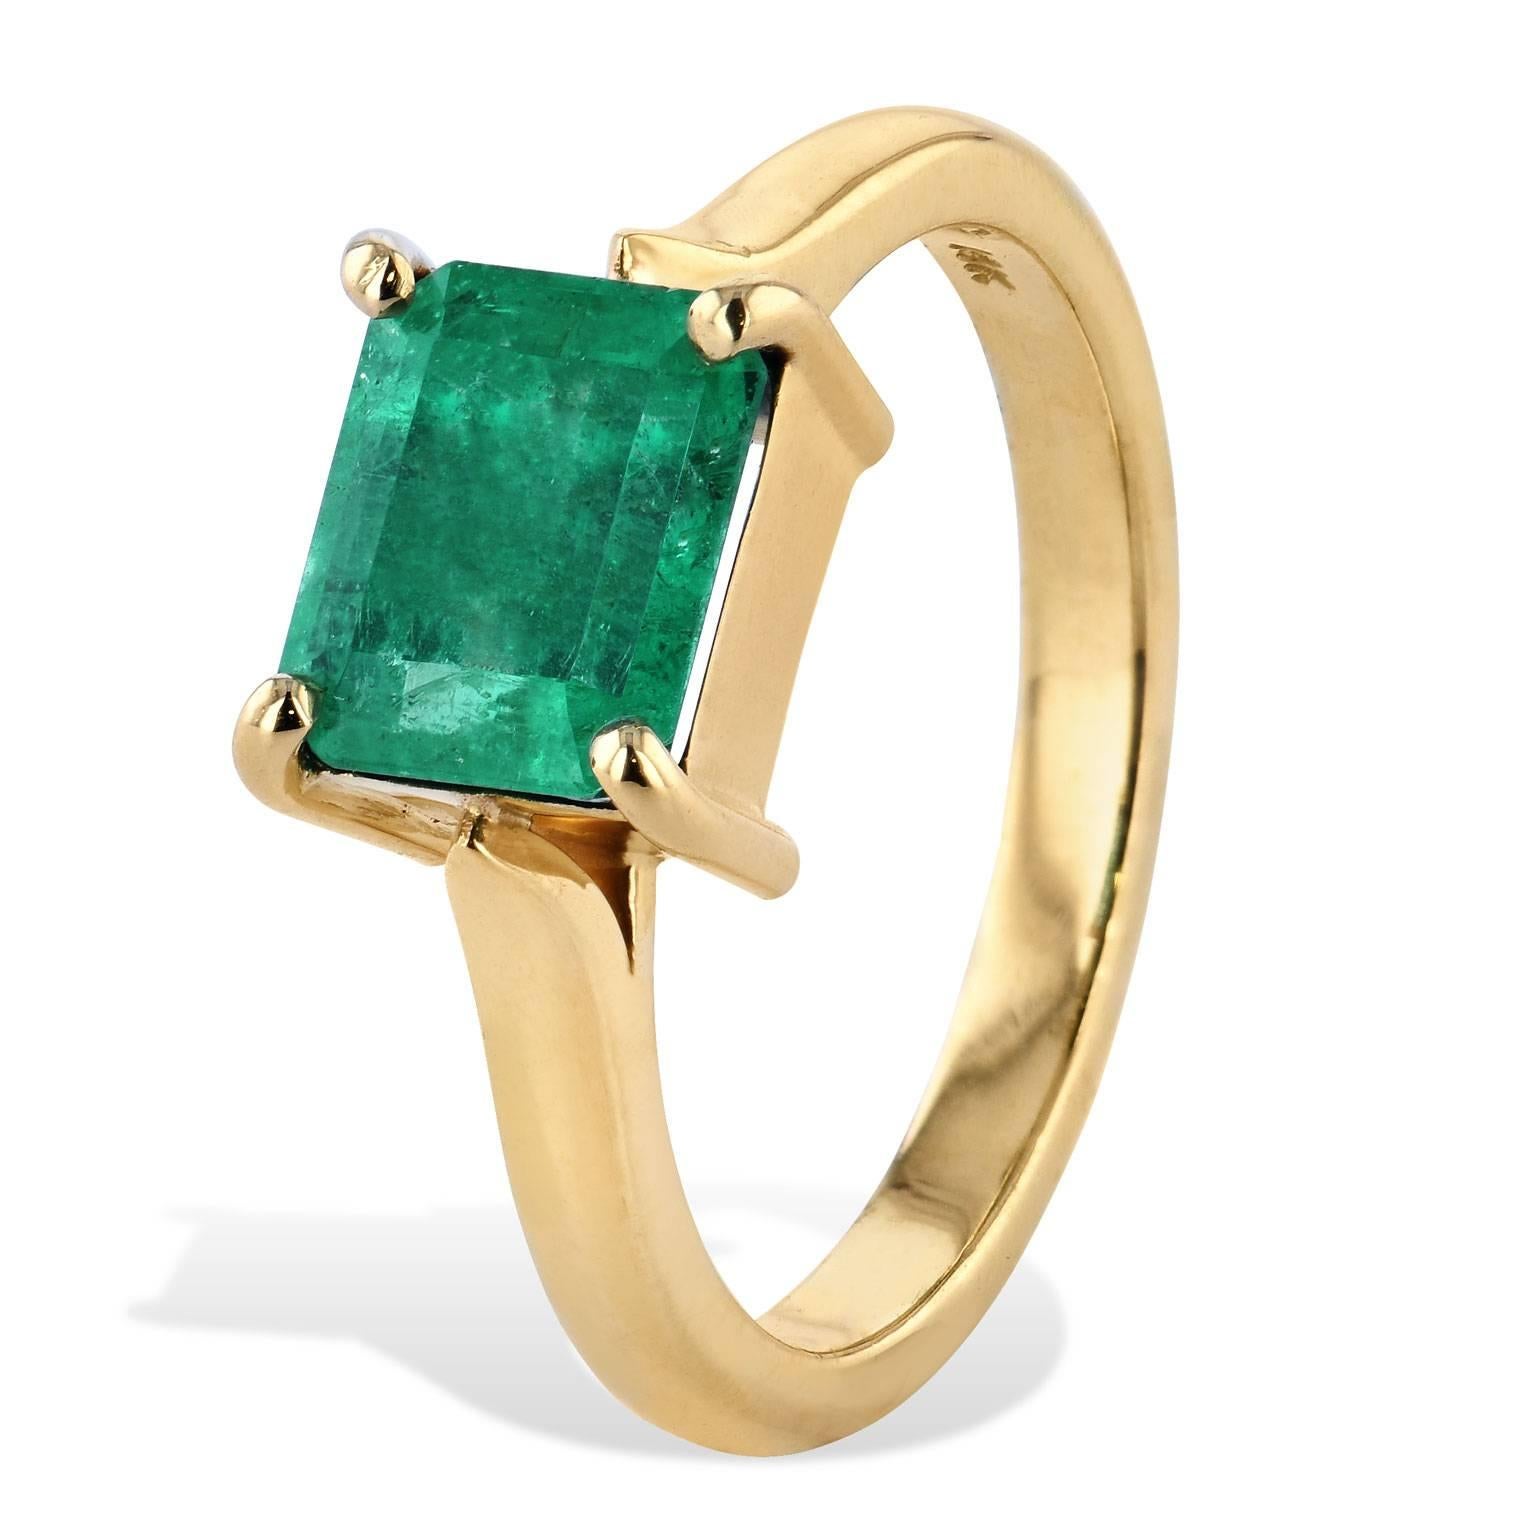 Enjoy this previously loved 2.10 carat, four-prong set, emerald cut emerald ring fashioned in 14 karat yellow gold (size 7.25). Become submerged into the deep pool of green. It is currently sized at 7.25.
Resizing is available upon request. 